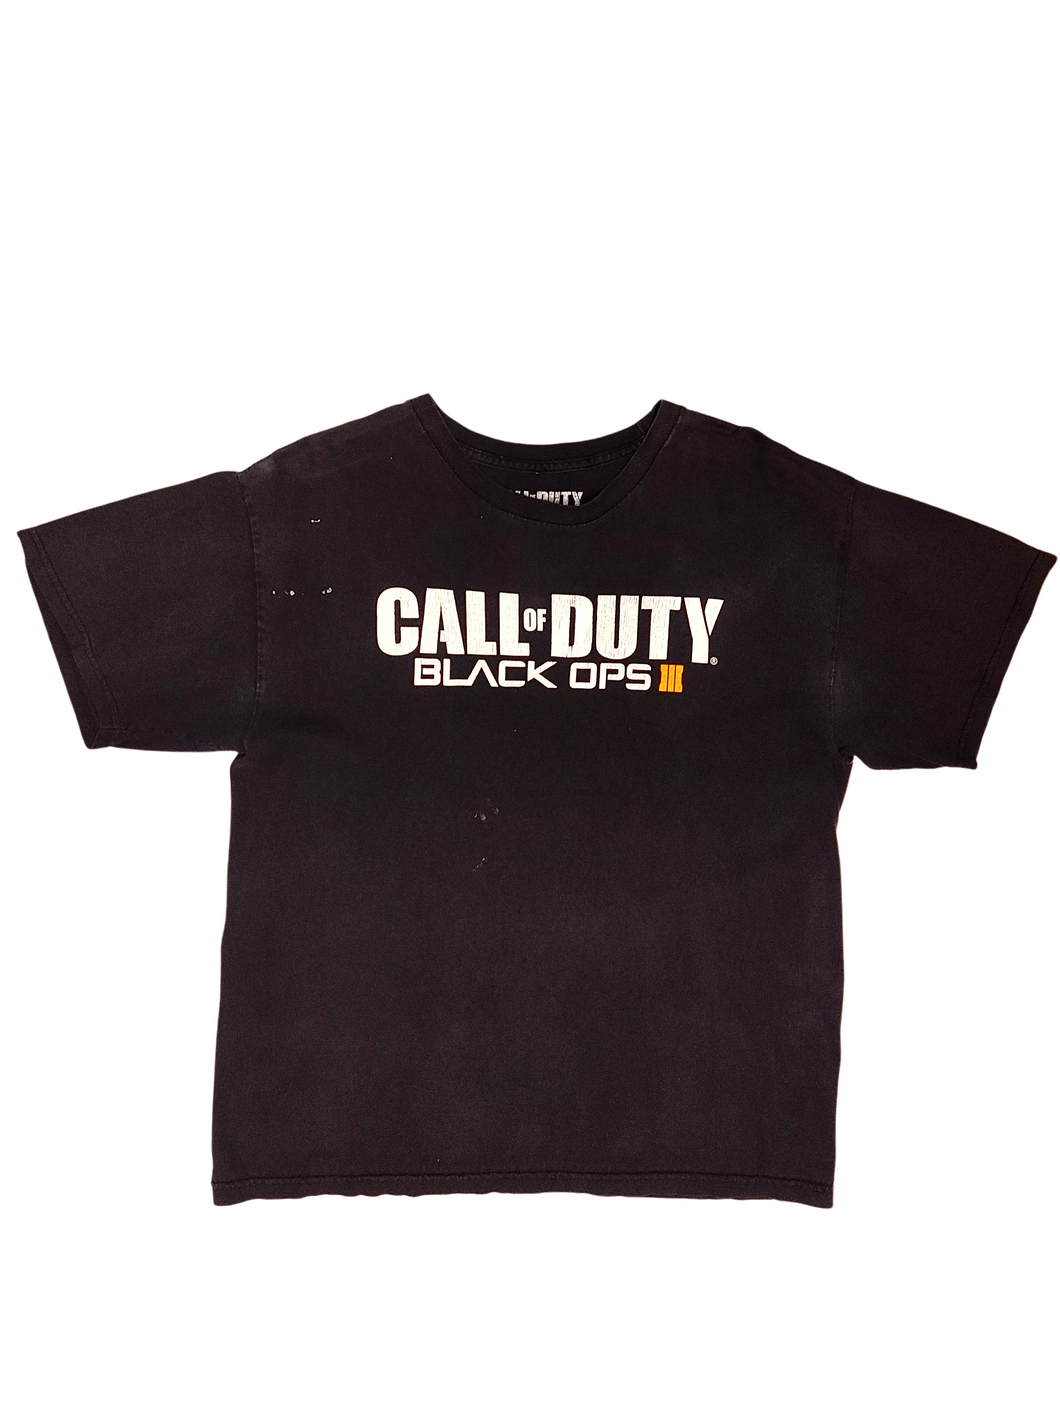 00s Call of Duty T-Shirt - Size L